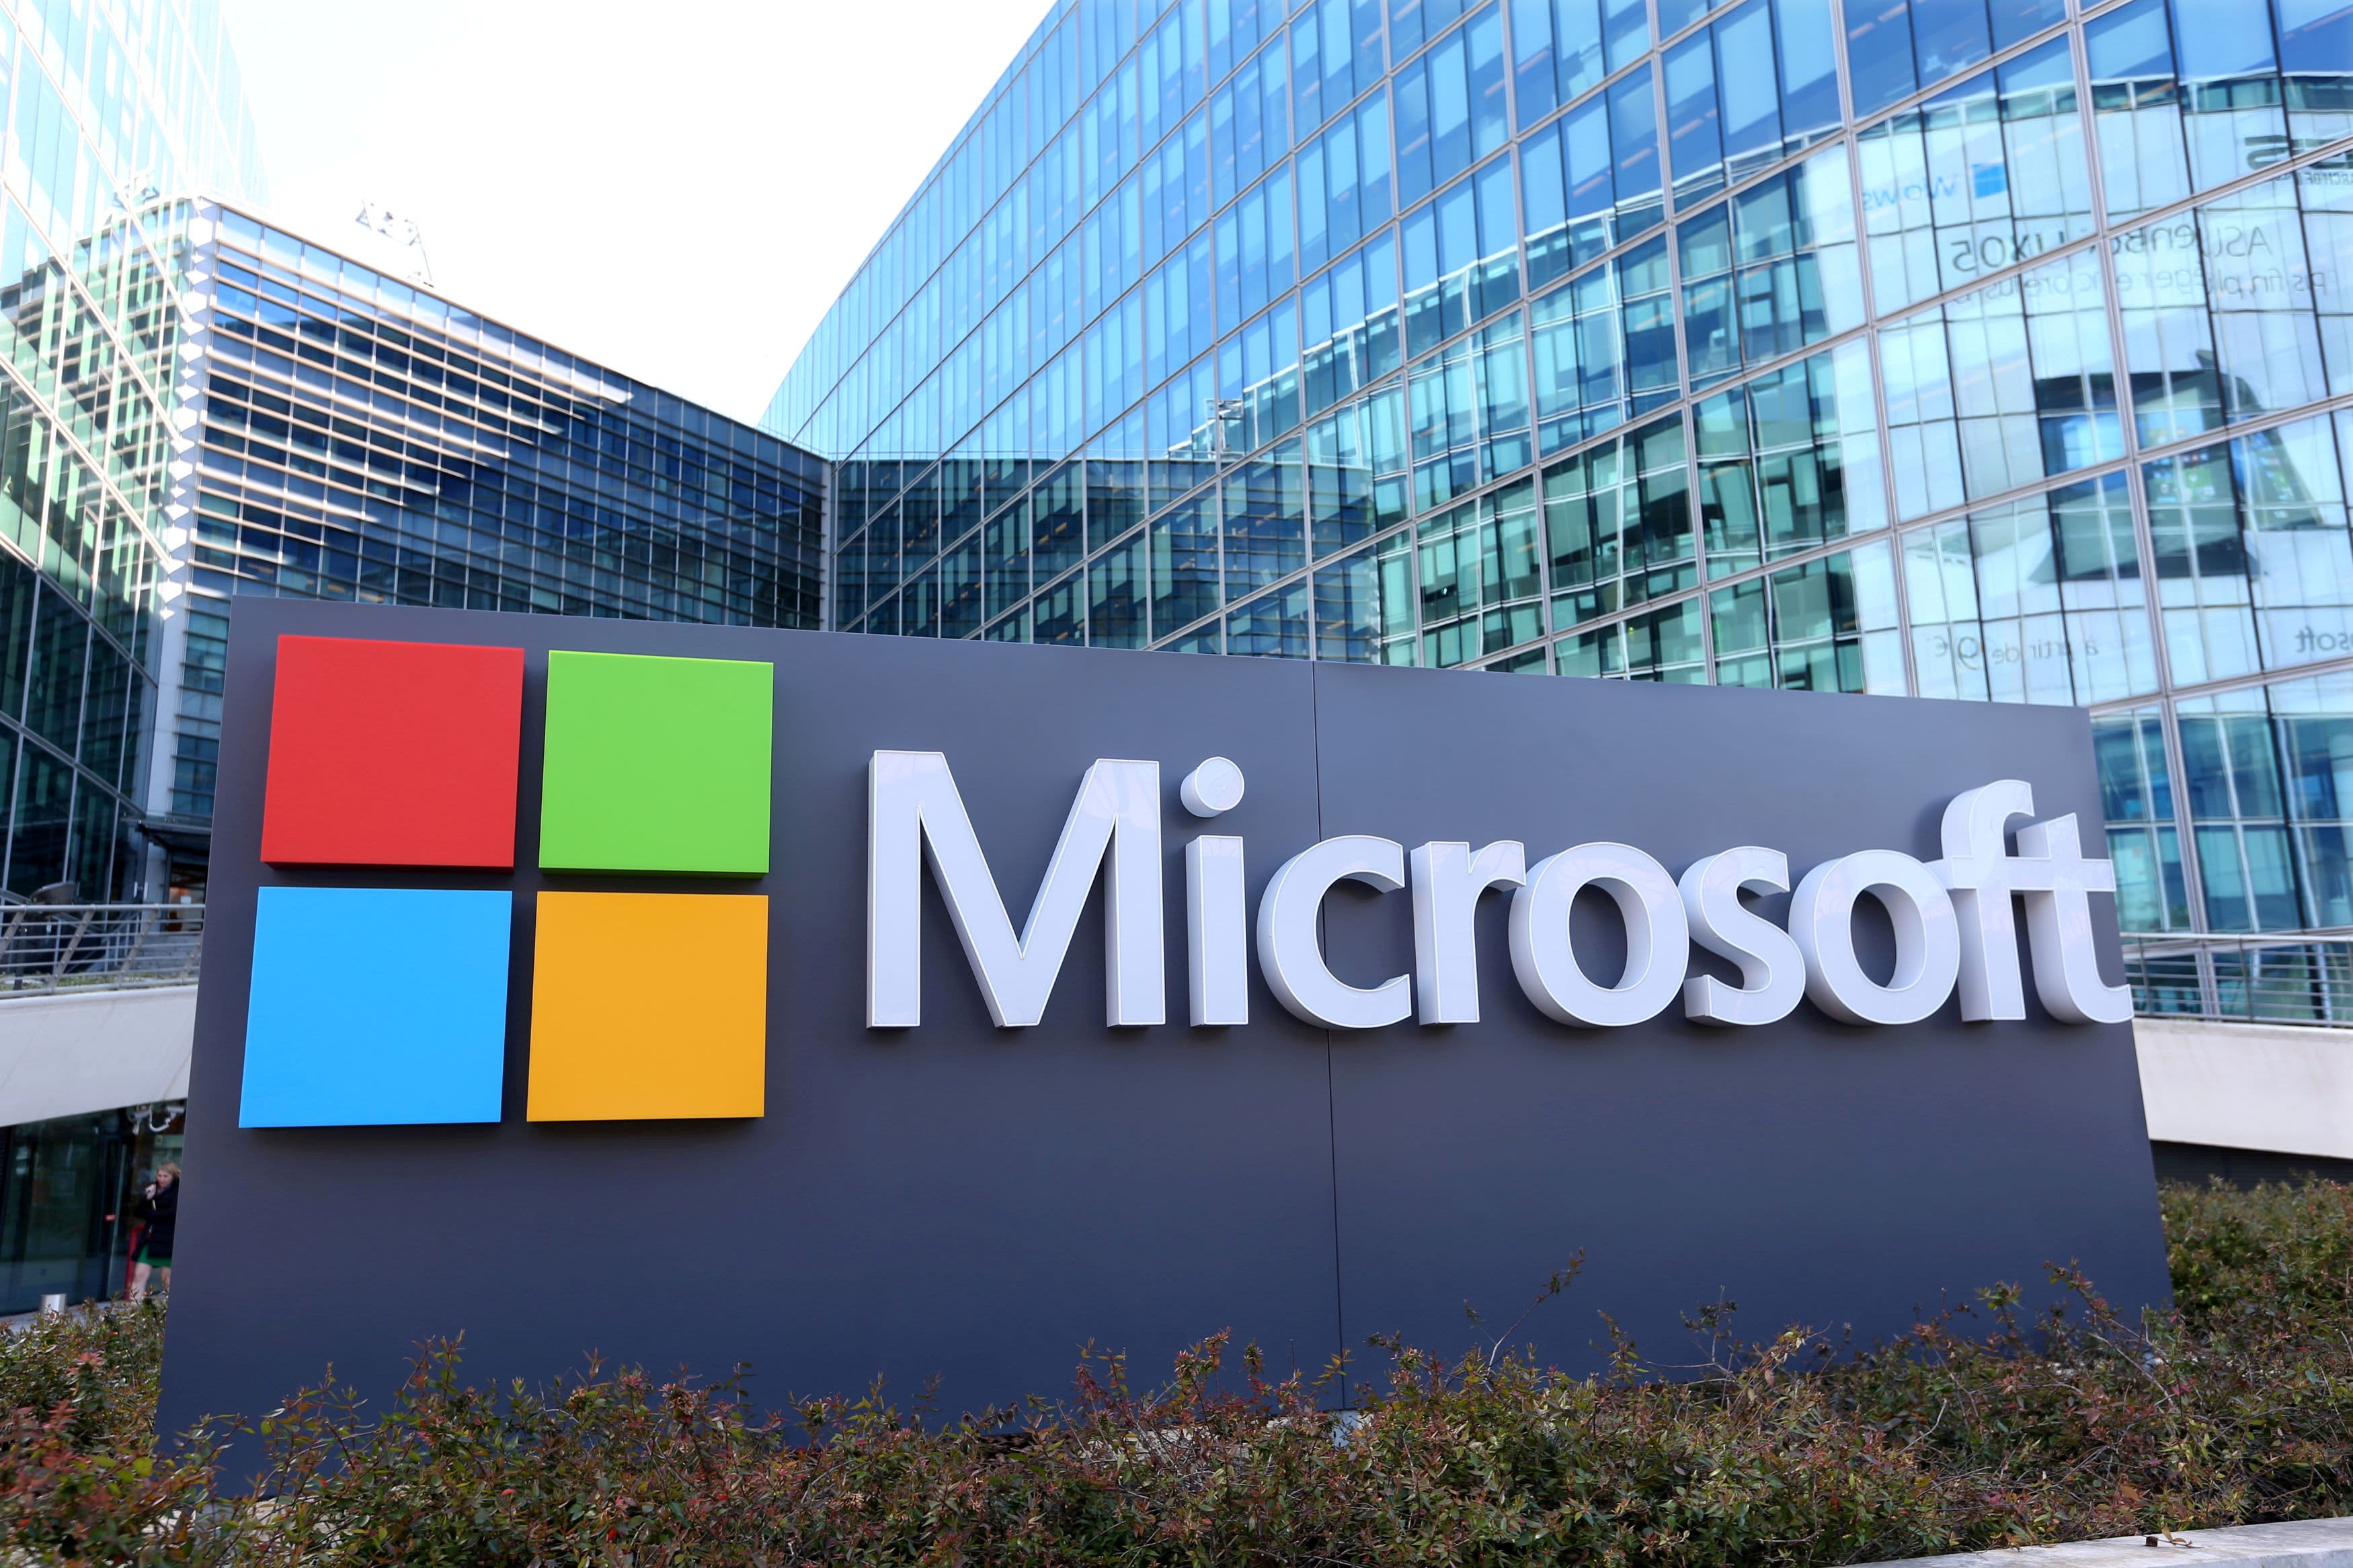 Tech analyst says buy the dip on Microsoft — and names the other tech stocks he likes